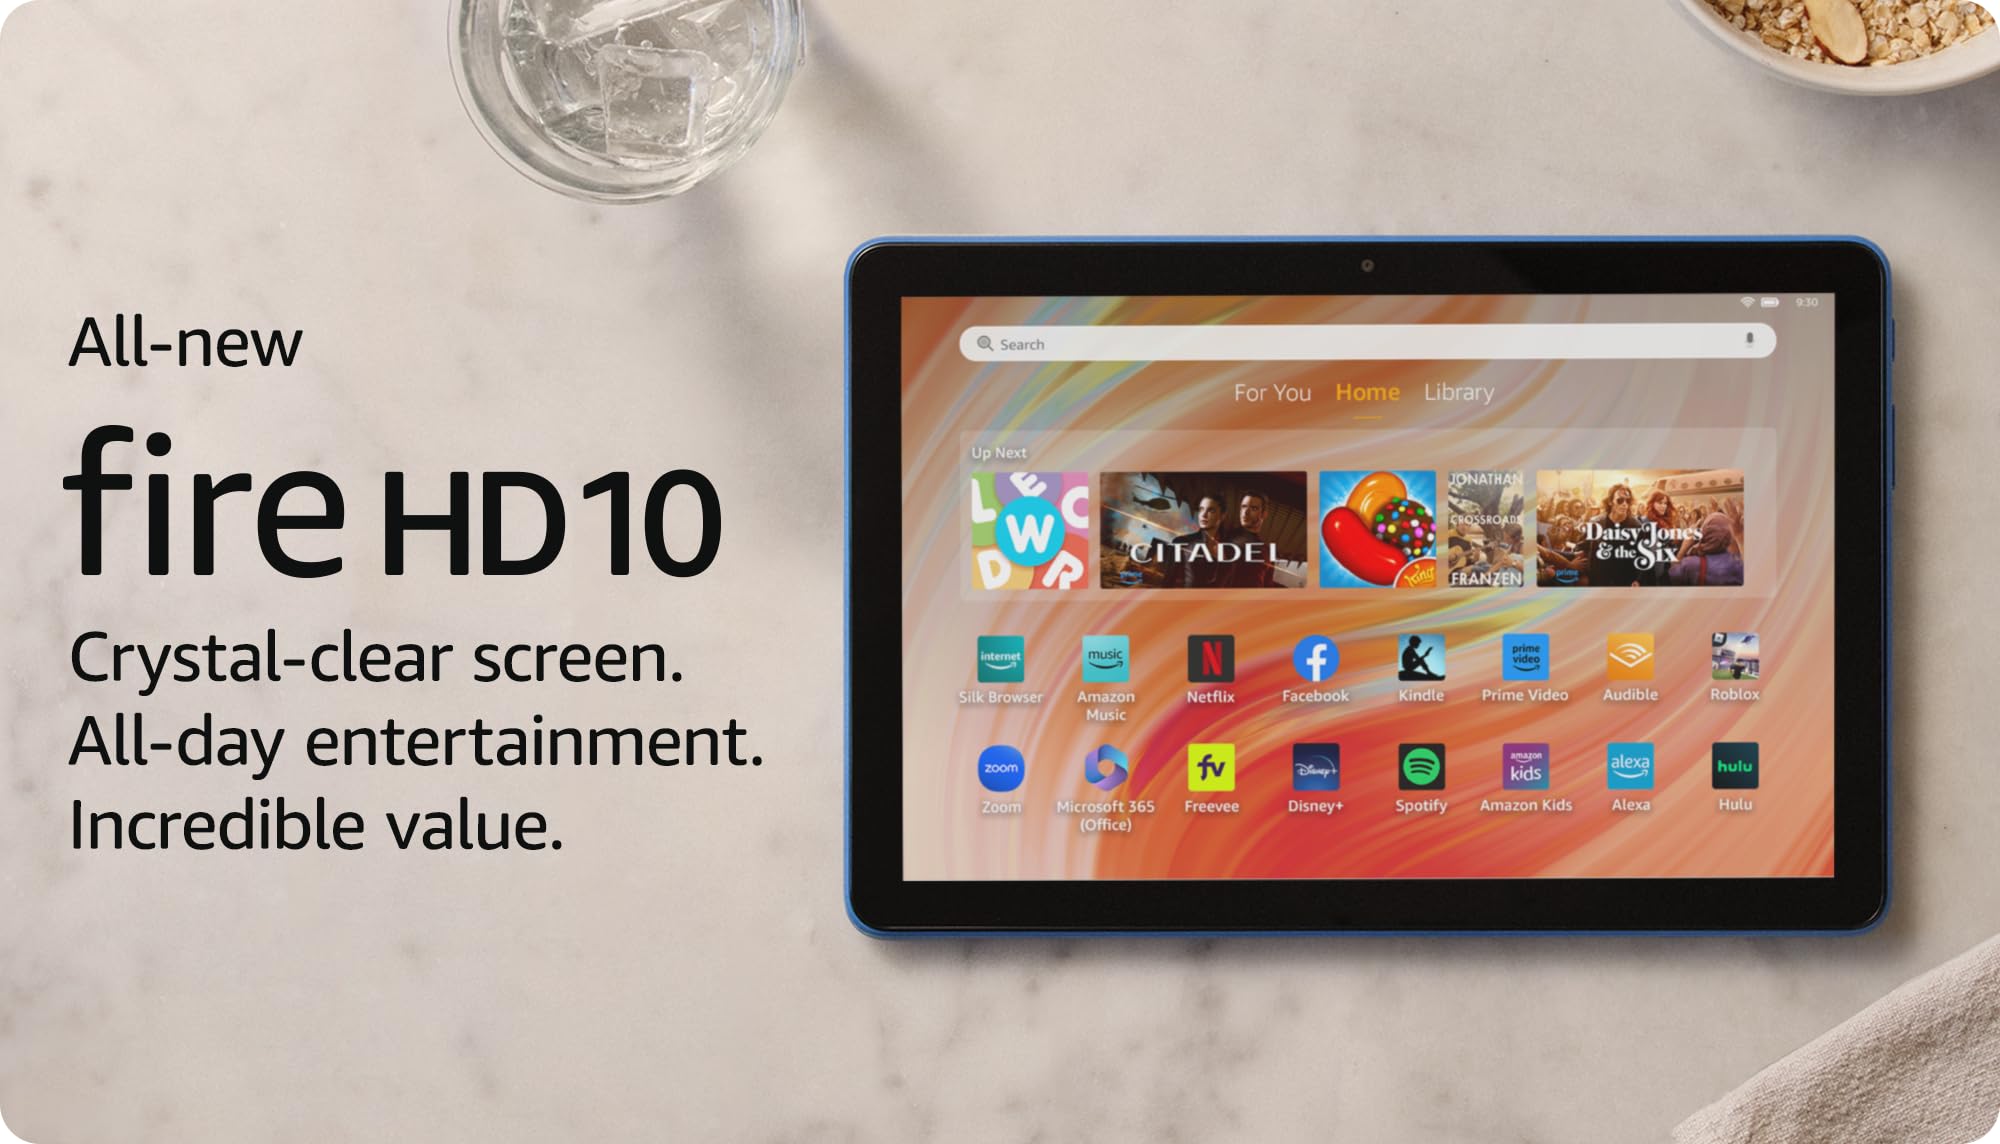 All-new Amazon Fire HD 10 tablet, built for relaxation, 10.1